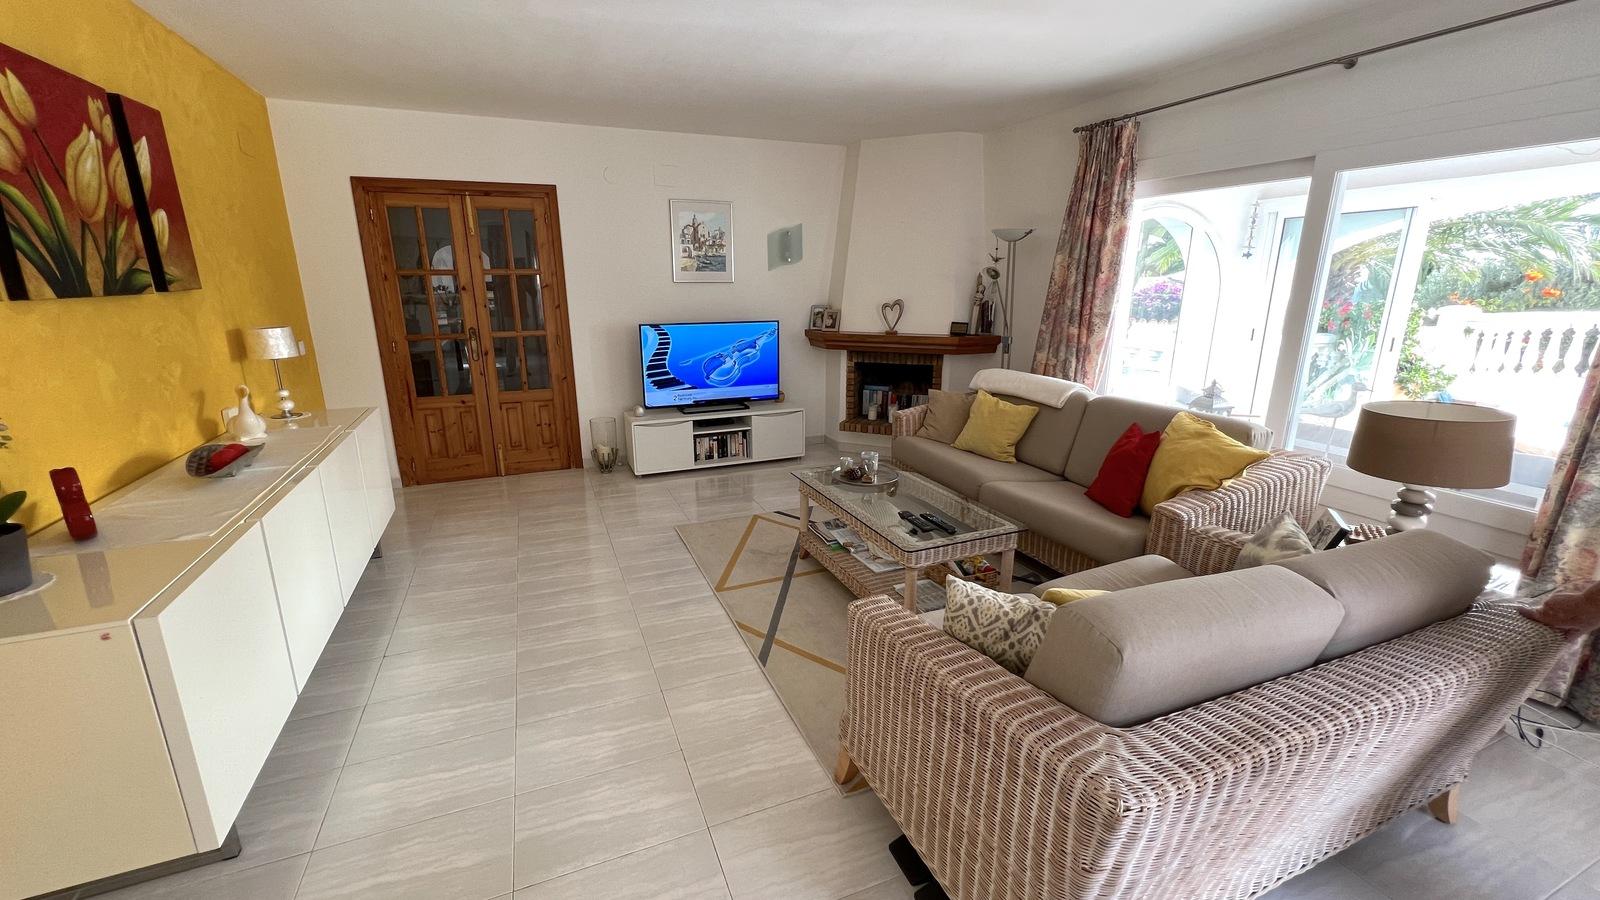 Top maintained villa, quiet and sunny only 200 metres from the sea.